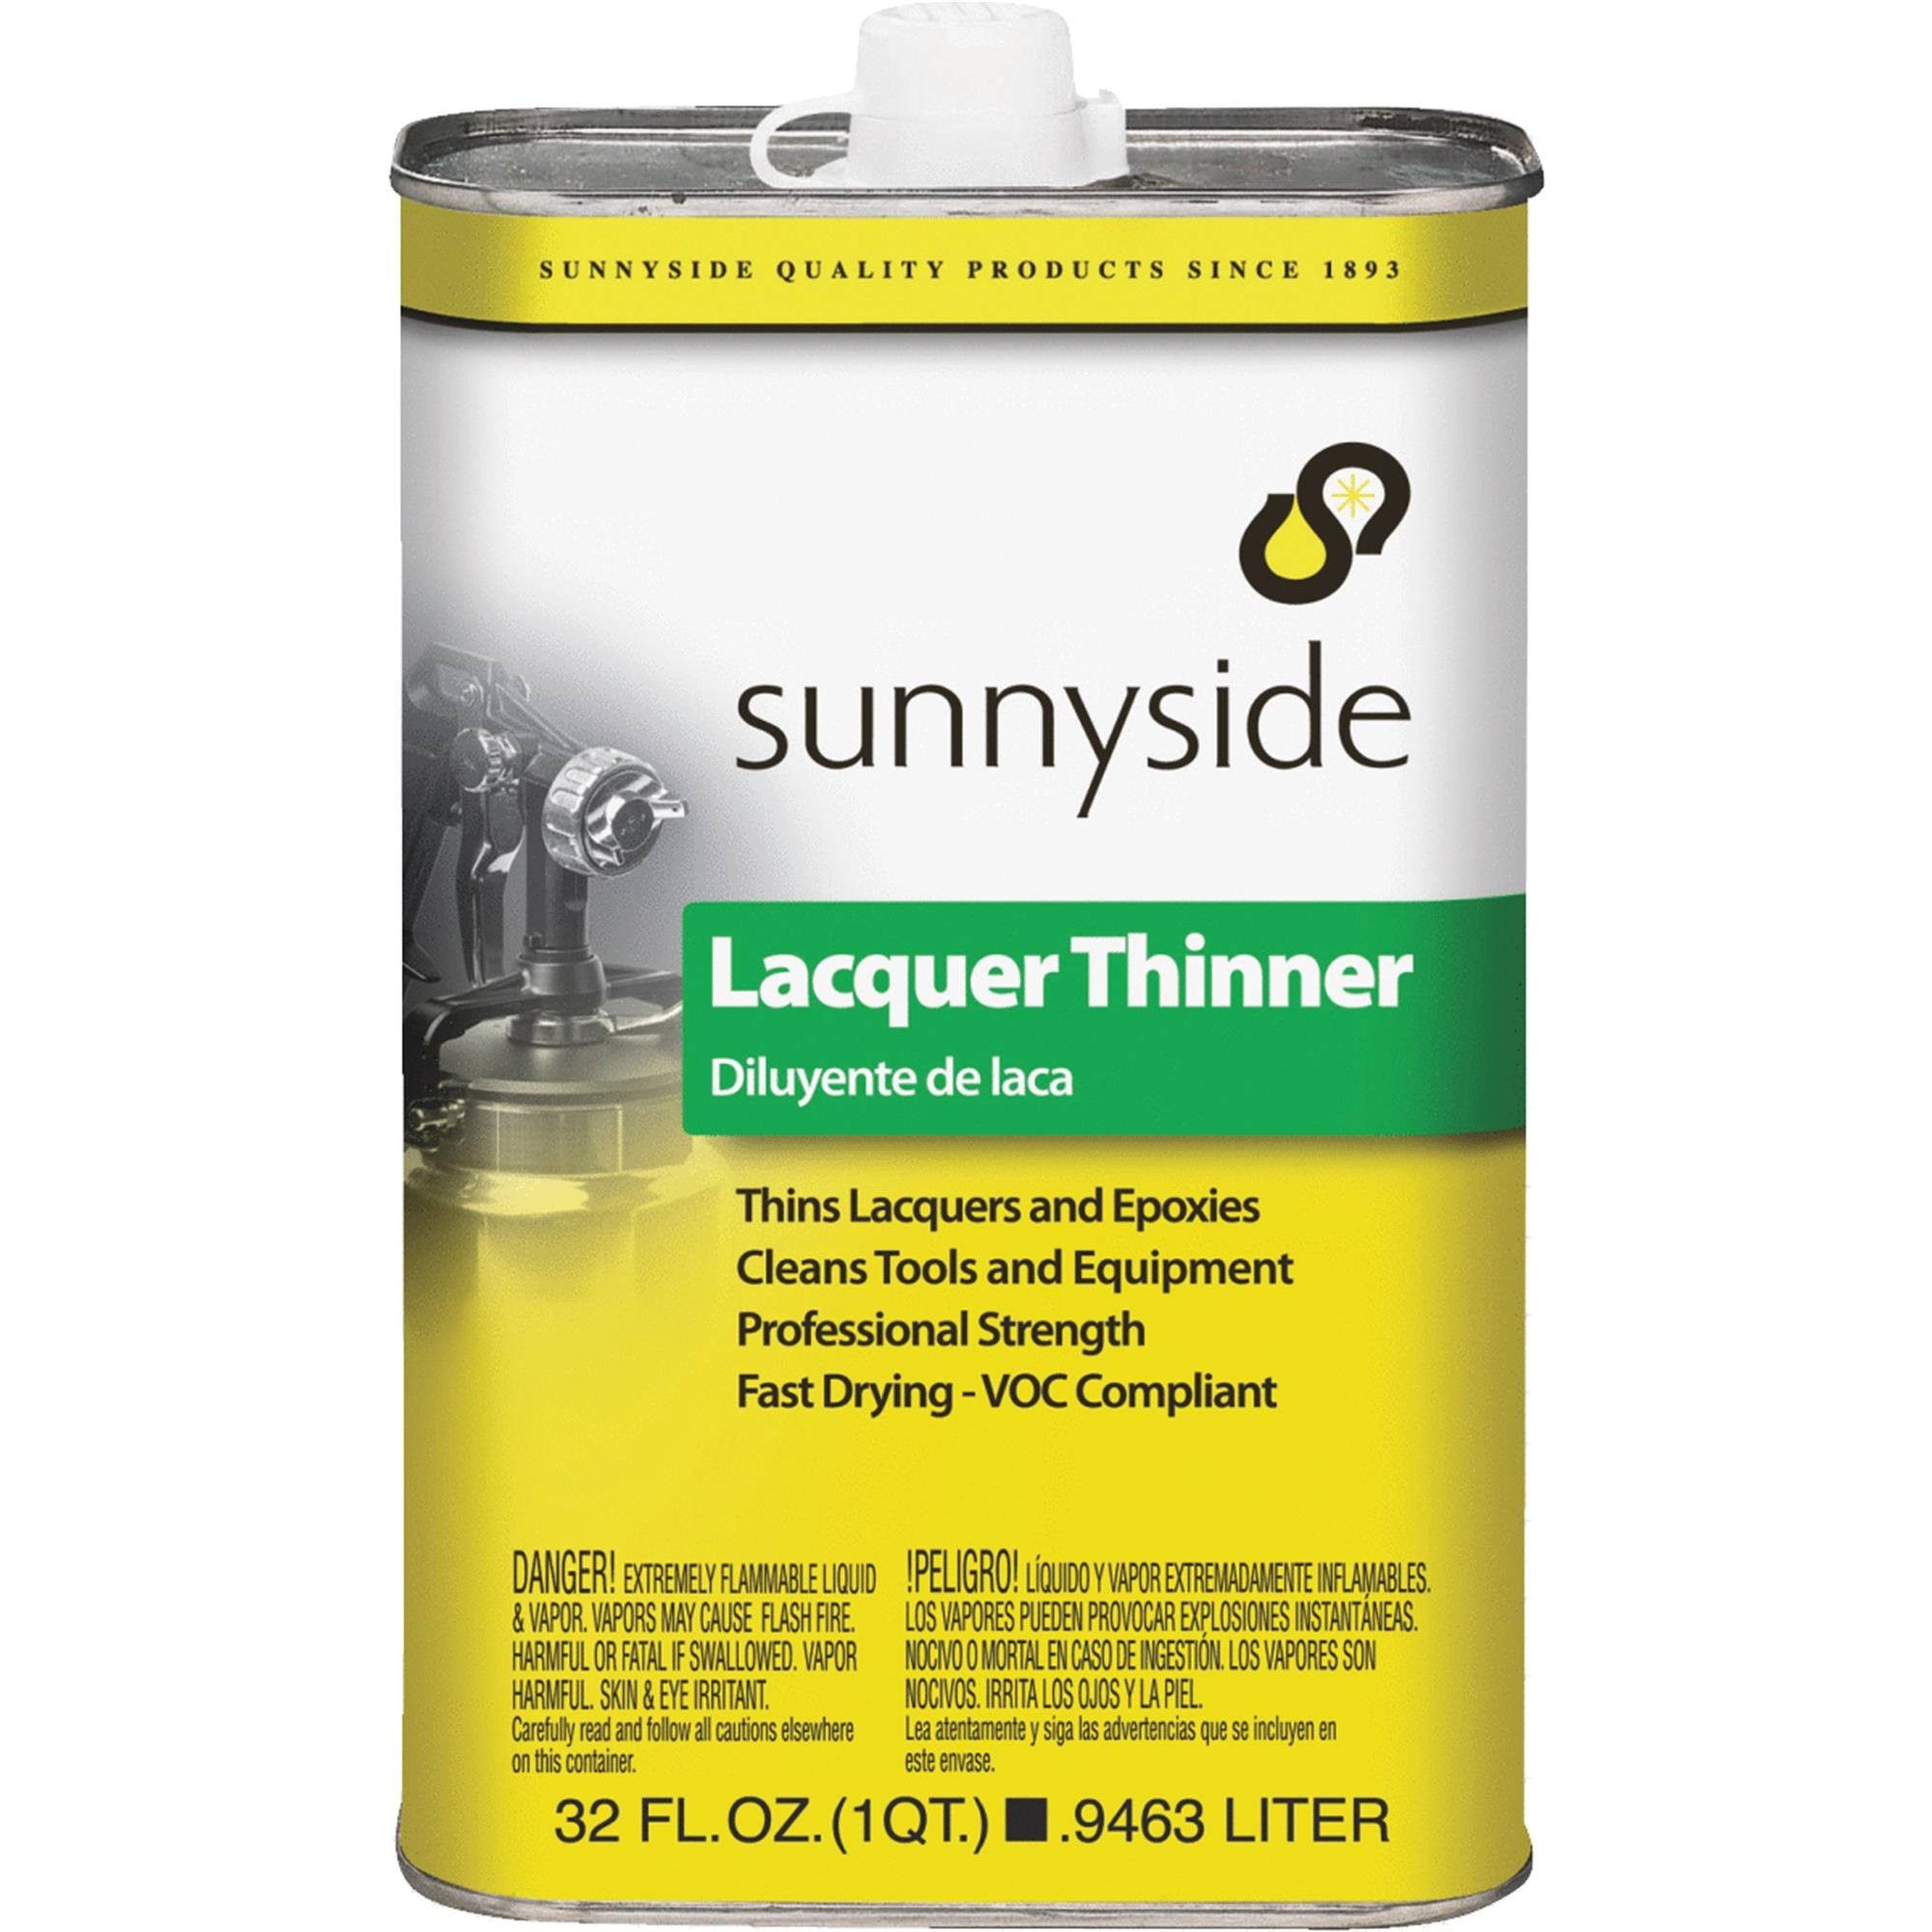 Sunnyside Low VOC Lacquer Thinner